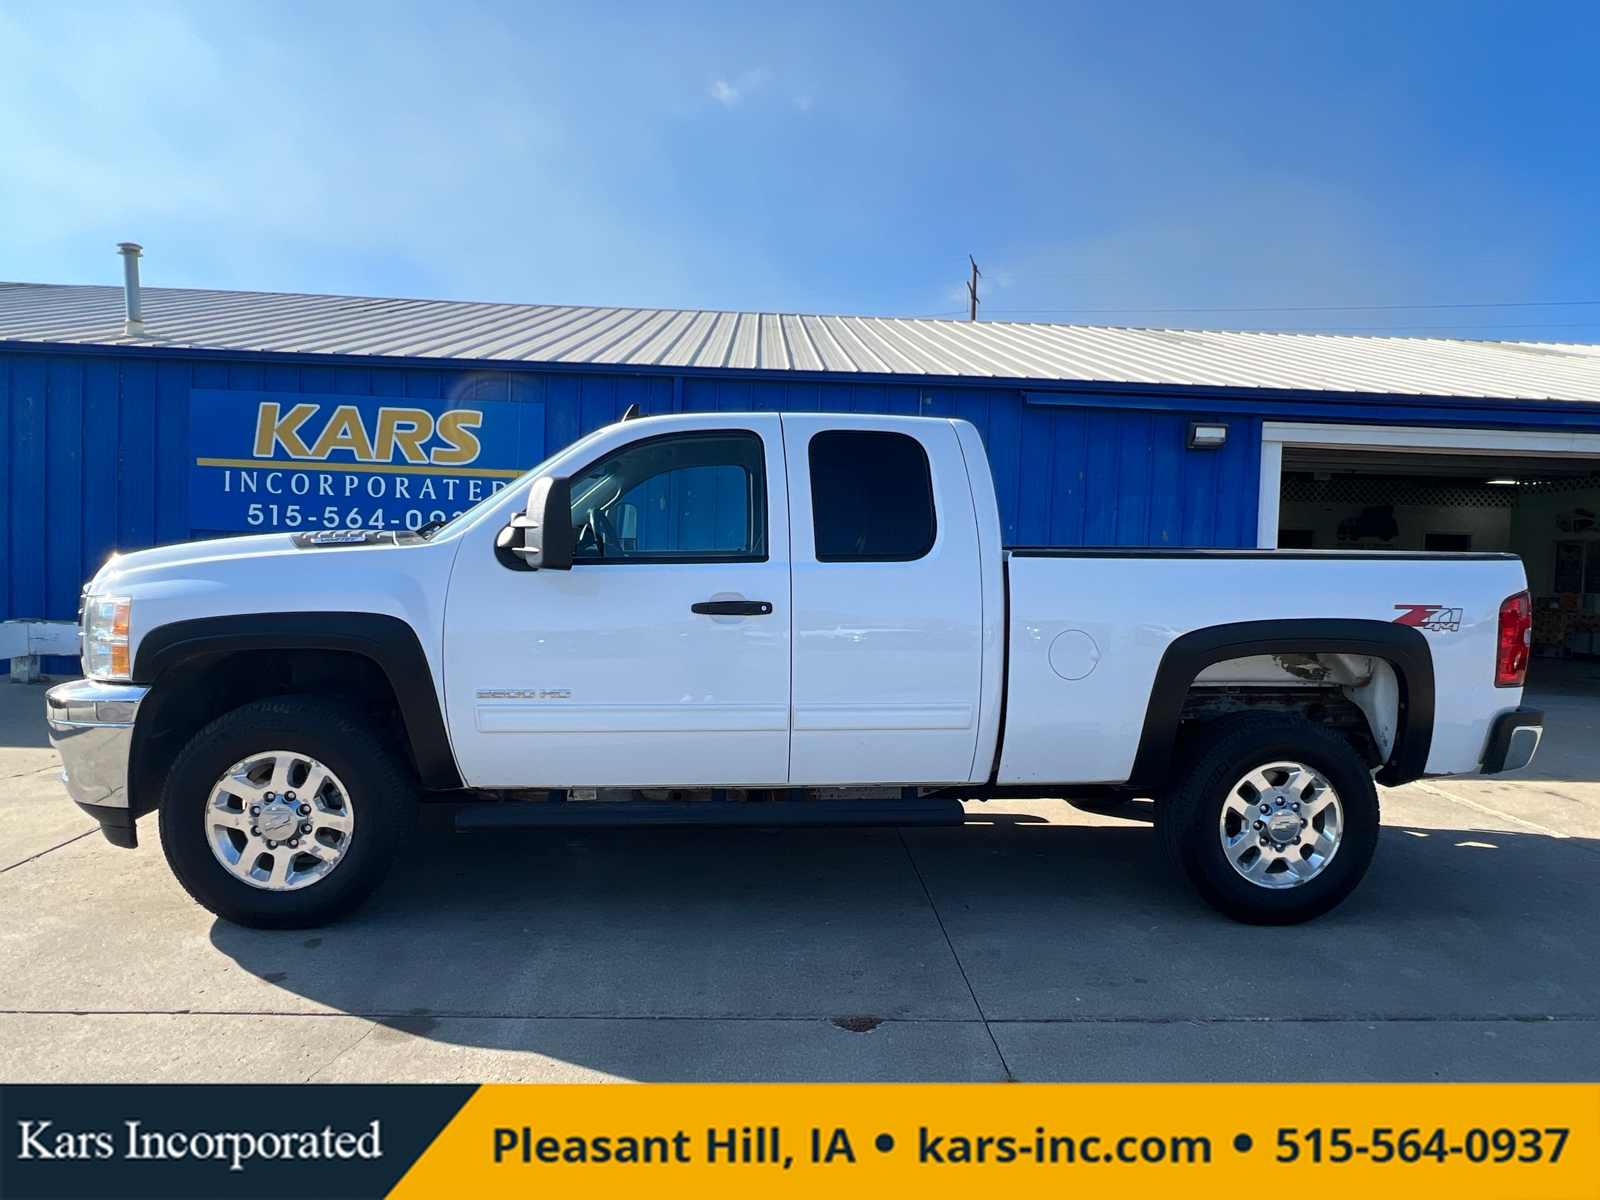 2012 Chevrolet Silverado 2500HD HEAVY DUTY LT 4WD Extended Cab  - C04333P  - Kars Incorporated